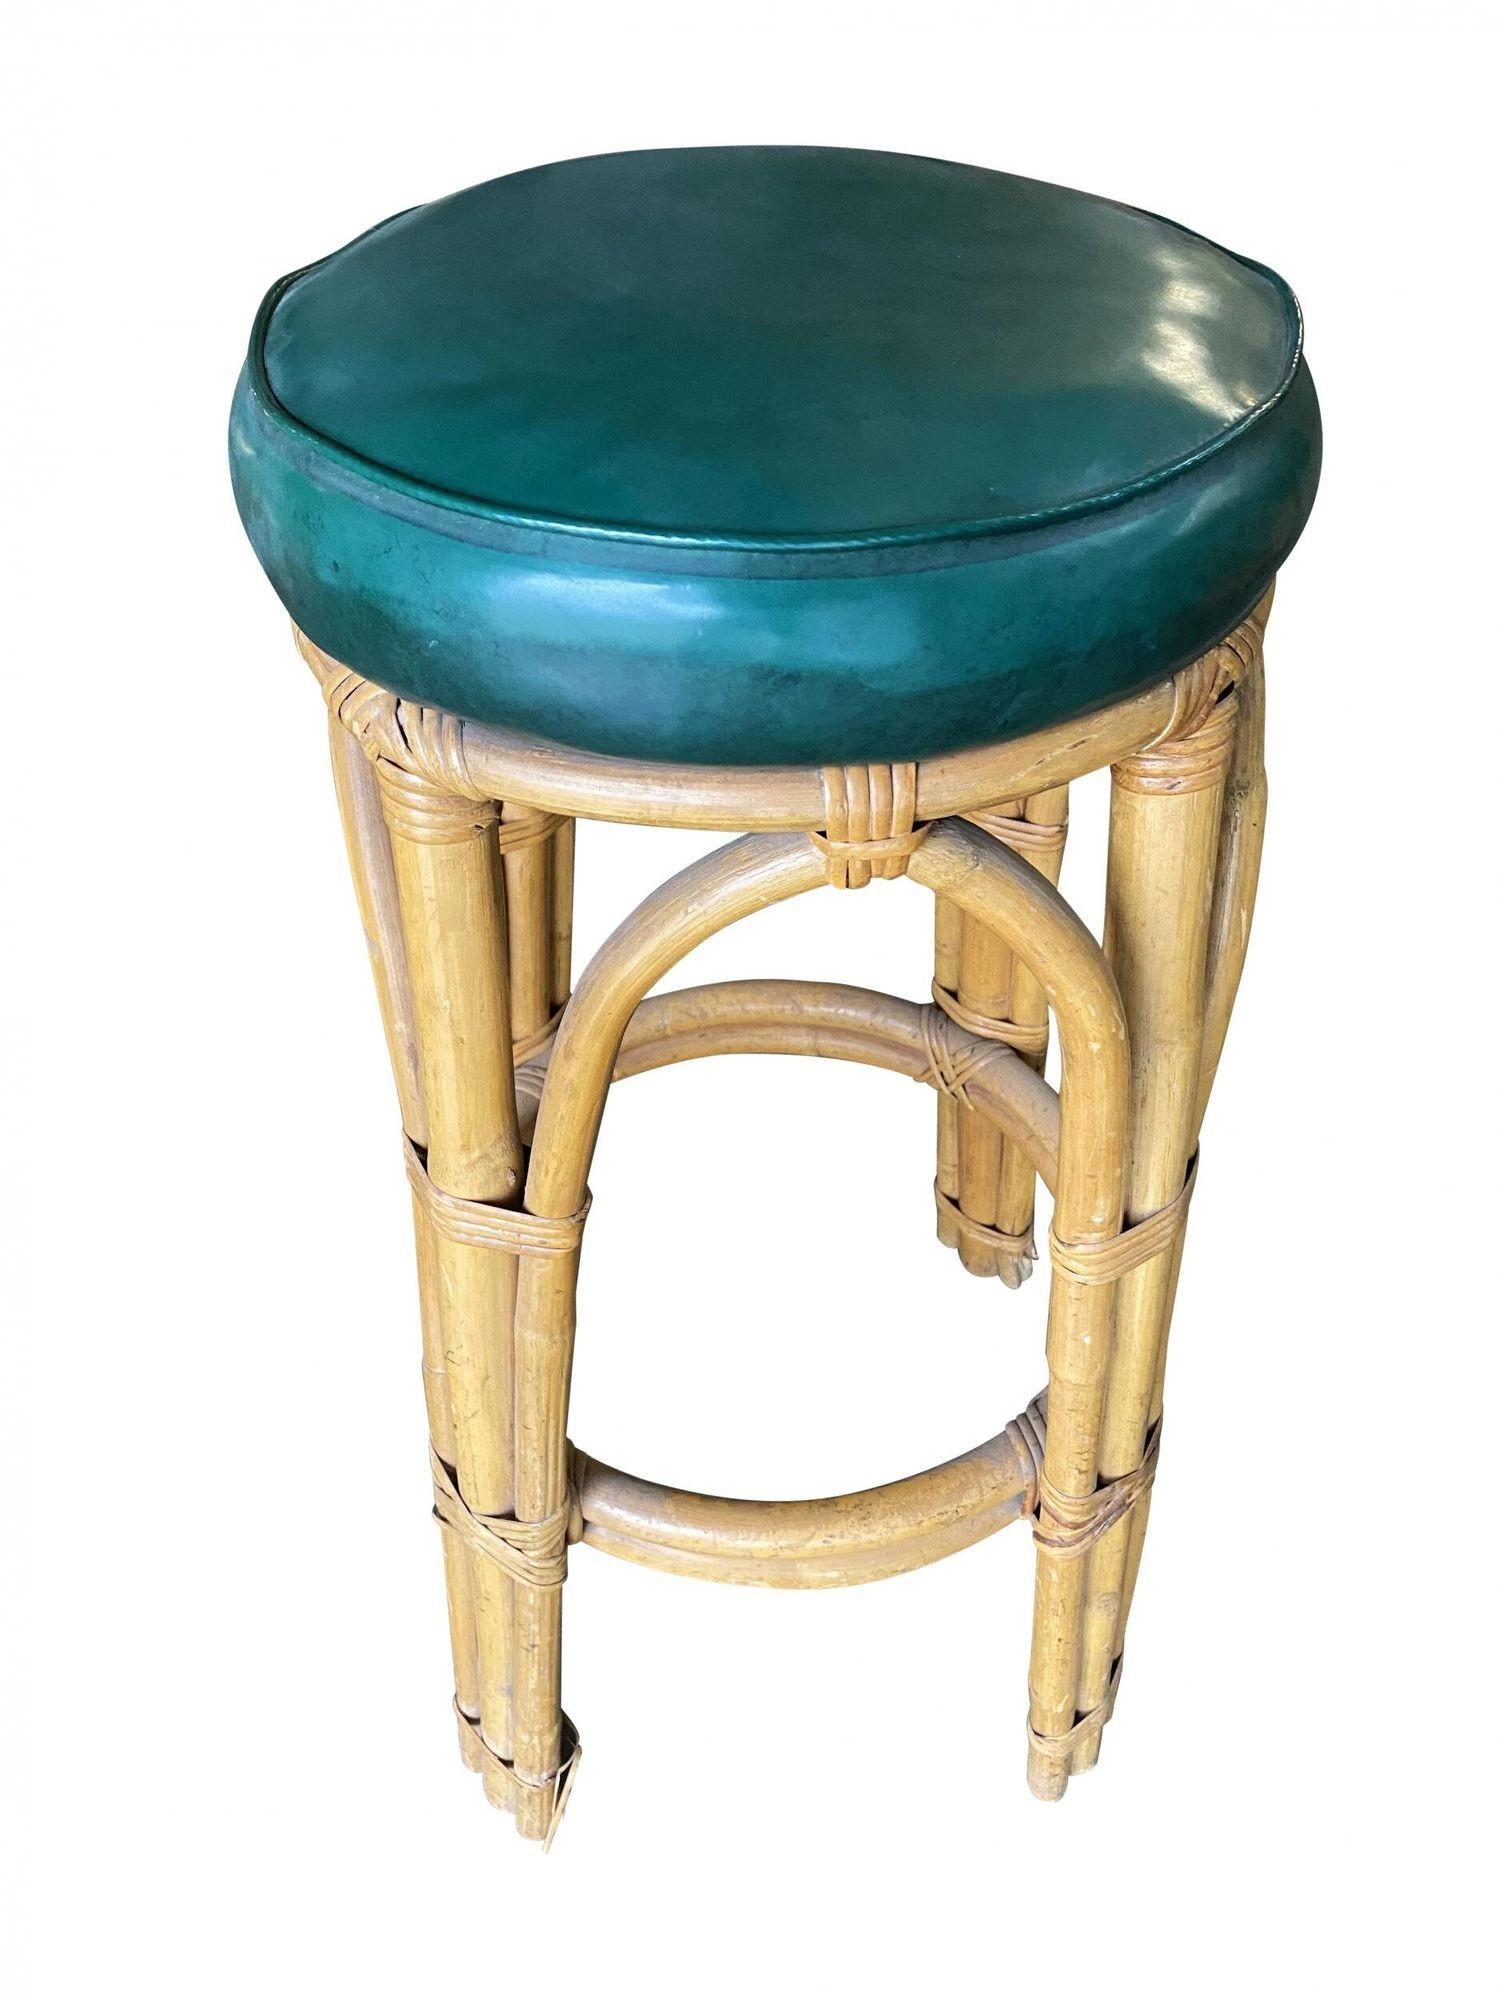 Restored three-stand arched base rattan bar stool with dark green vinyl seat. The stool features a foot great along the bottom
1950, United States
We only purchase and sell only the best and finest rattan furniture made by the best and most